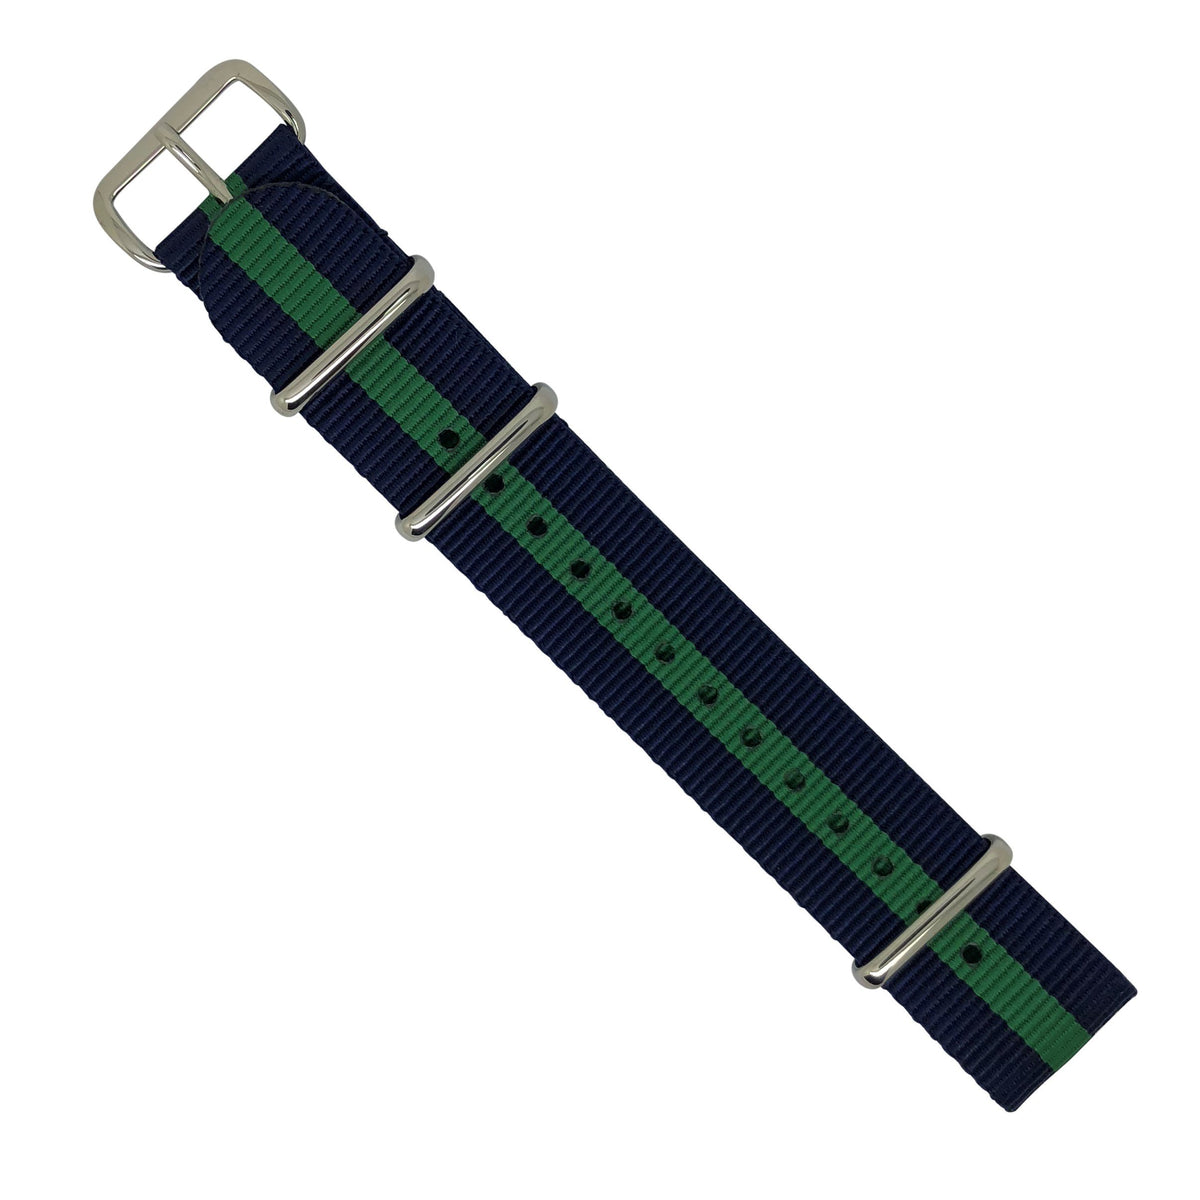 Premium Nato Strap in Navy Green with Polished Silver Buckle (20mm) - Nomad Watch Works Malaysia